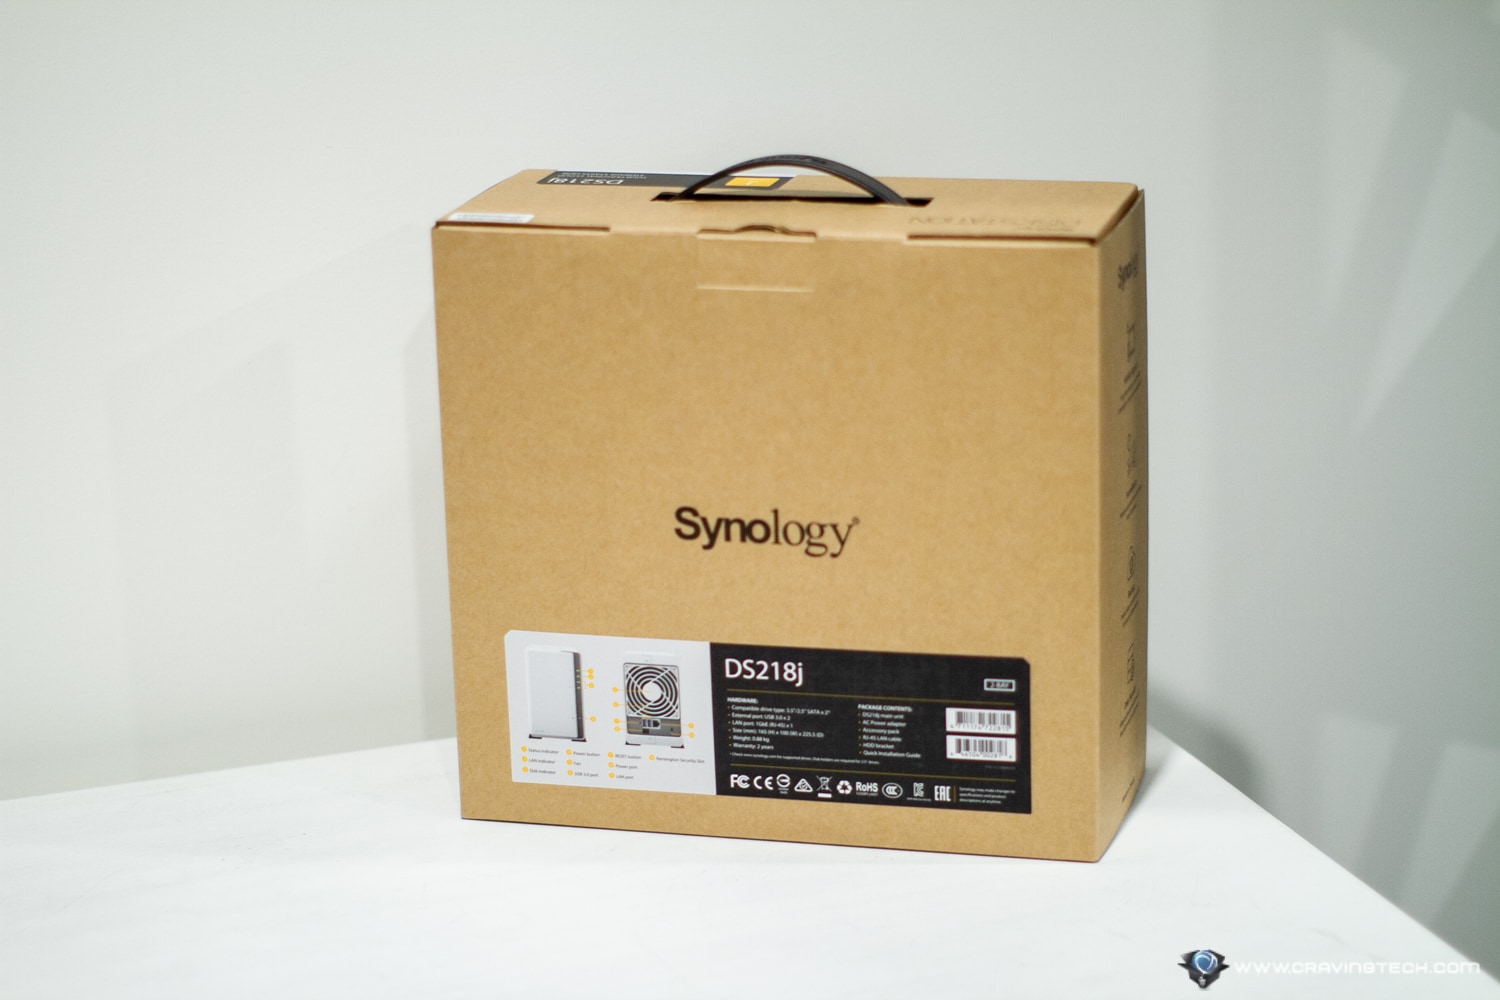 Synology-DS218j-Review Packaging